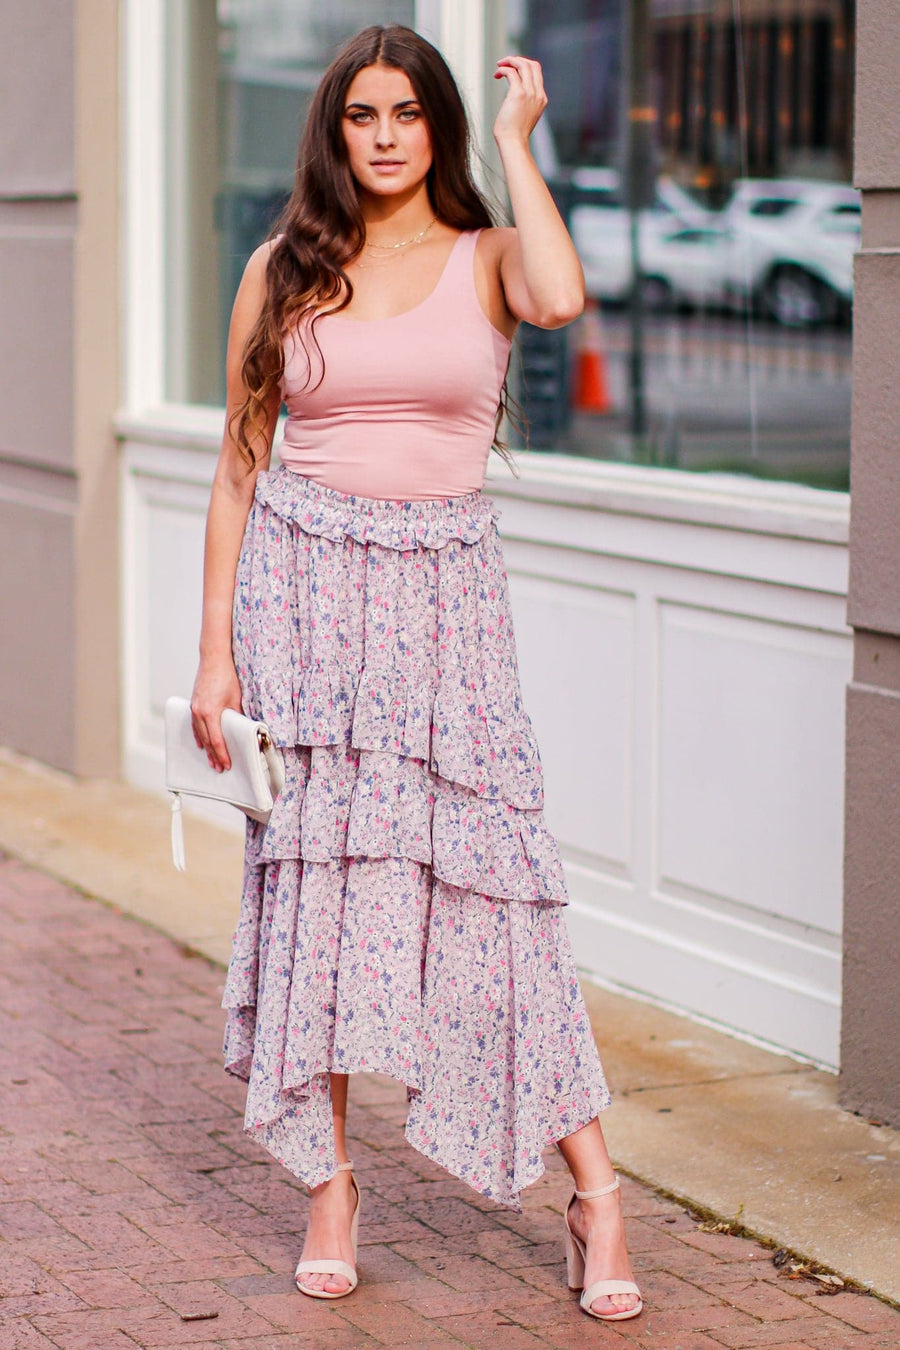  Melody Garden Floral Maxi Skirt - FINAL SALE - Madison and Mallory